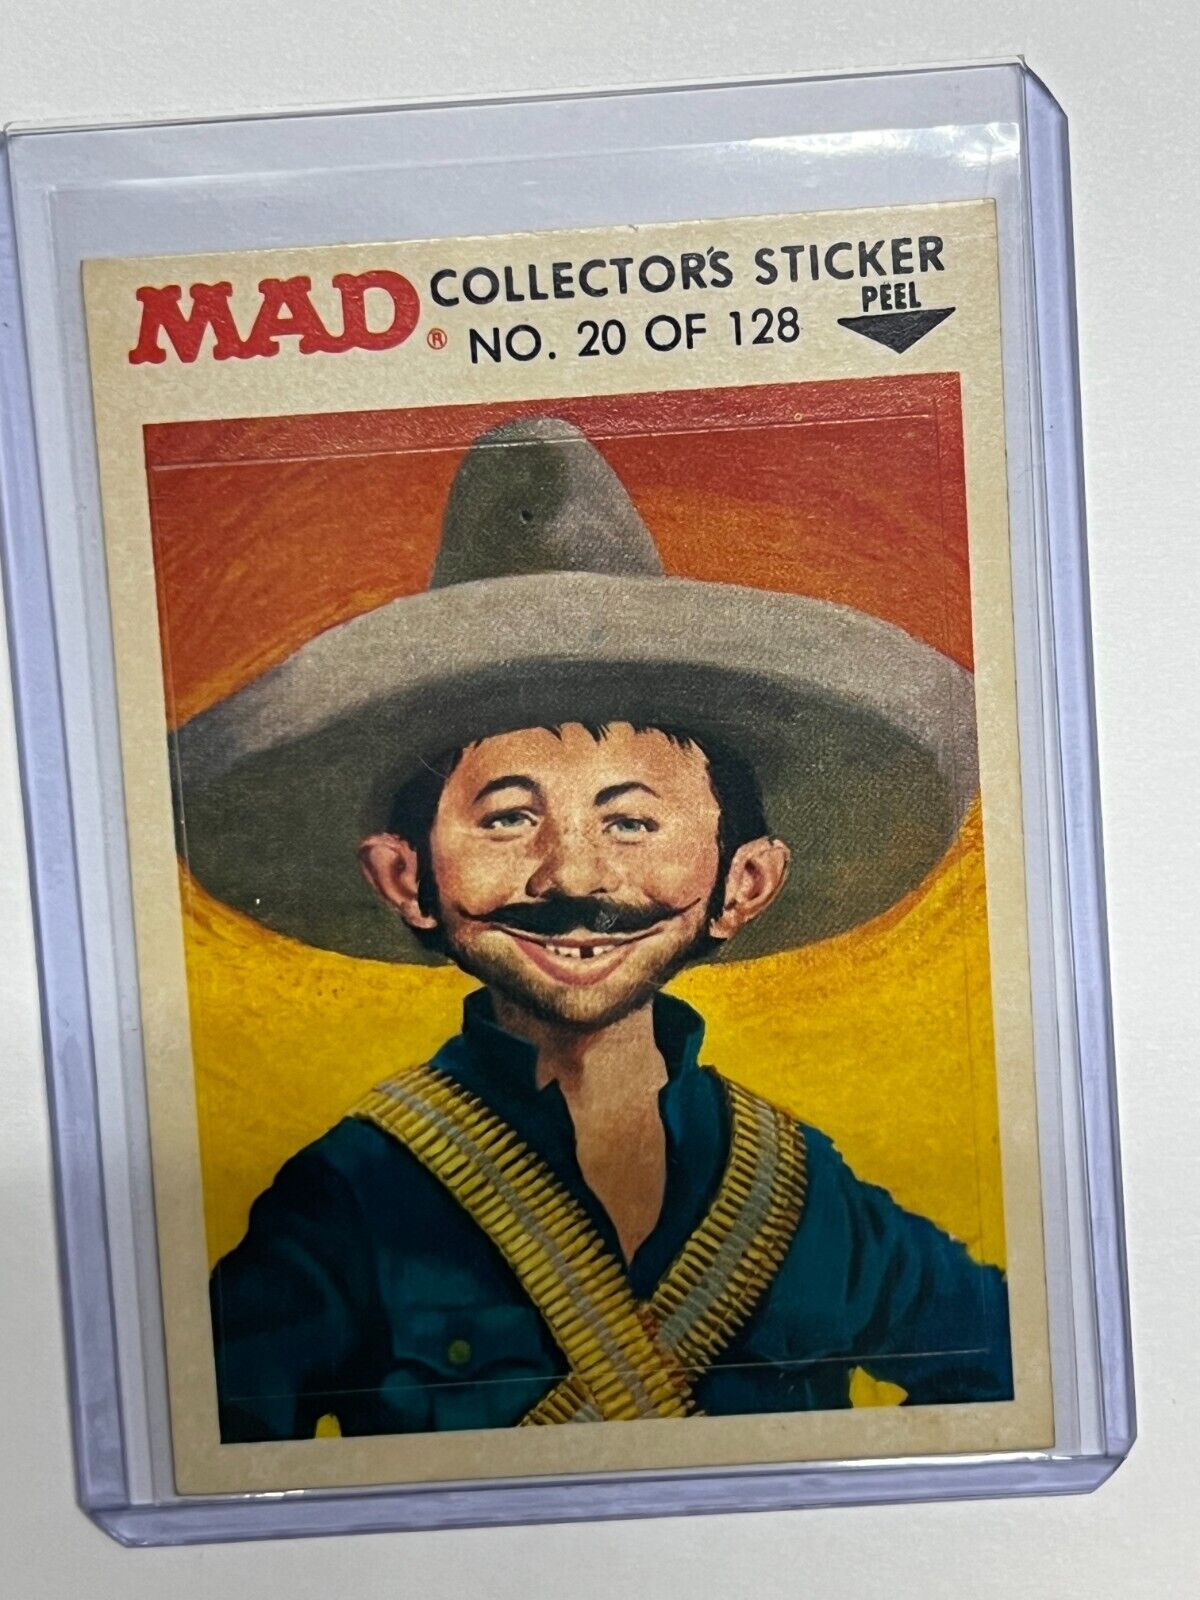 1983 Fleer Mad Stickers Trouble Sticker Alfred E Newman as Pancho Villa #20